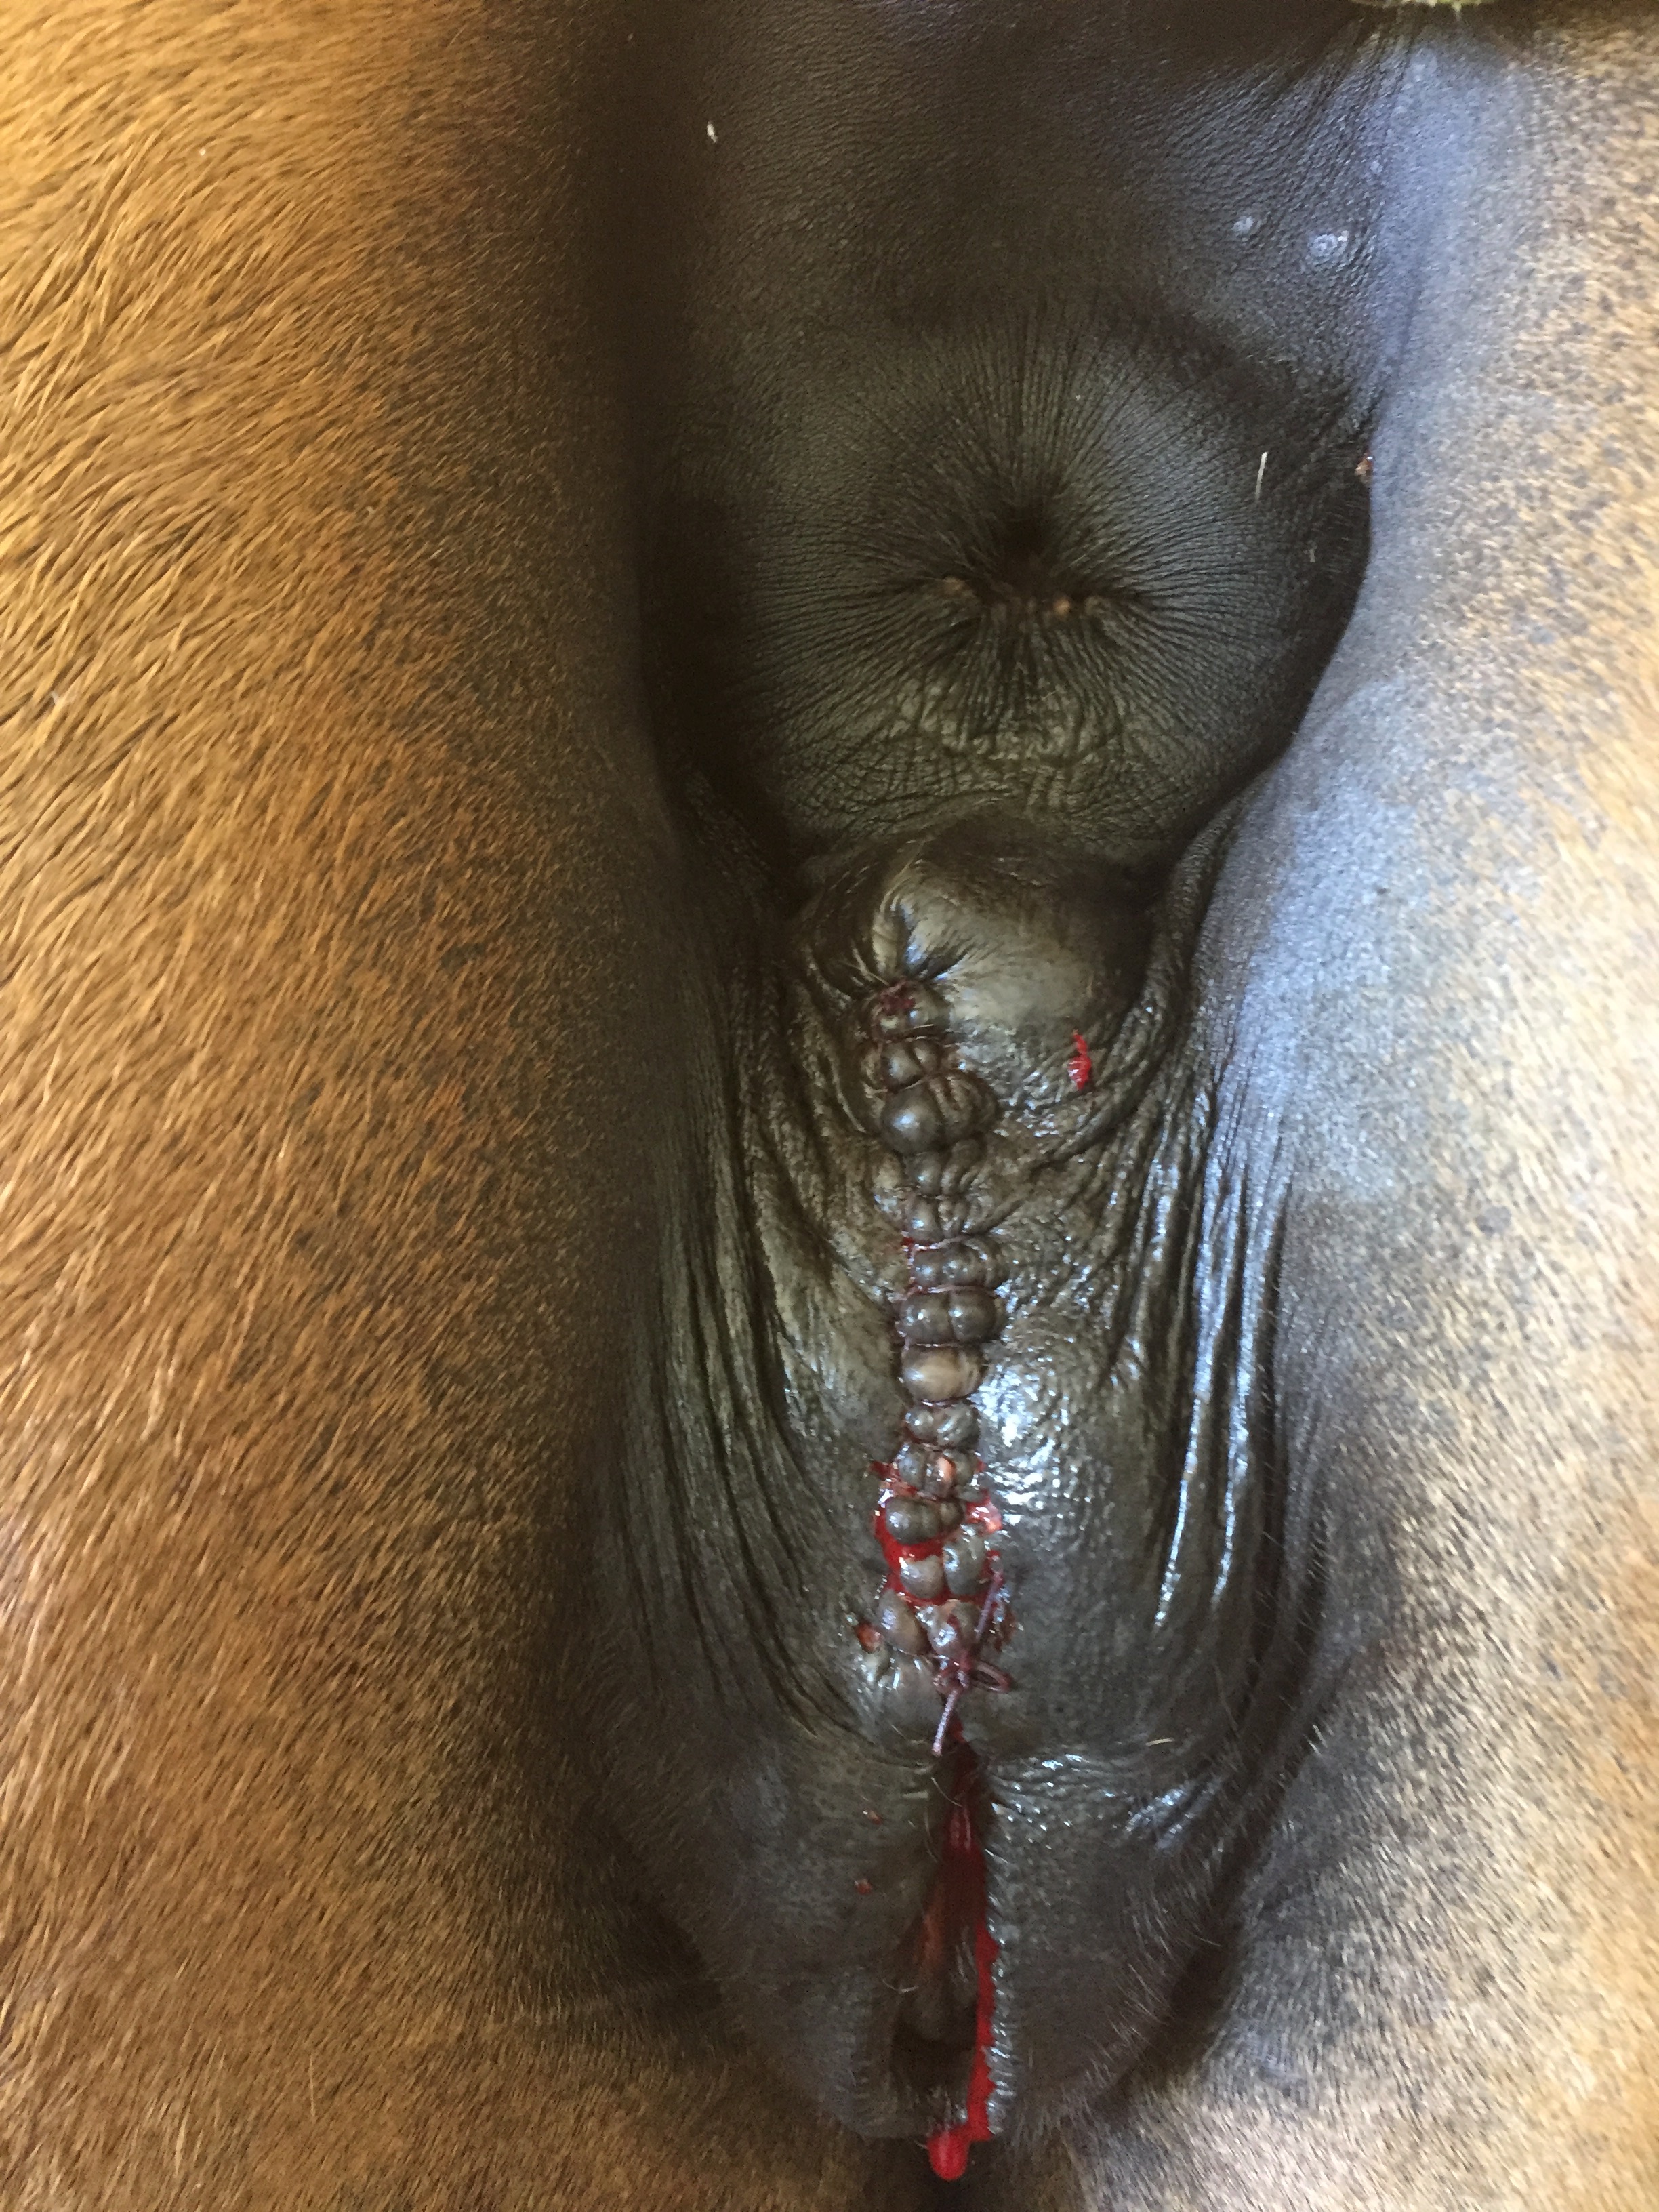 Mare vulva with completed Caslick surgery